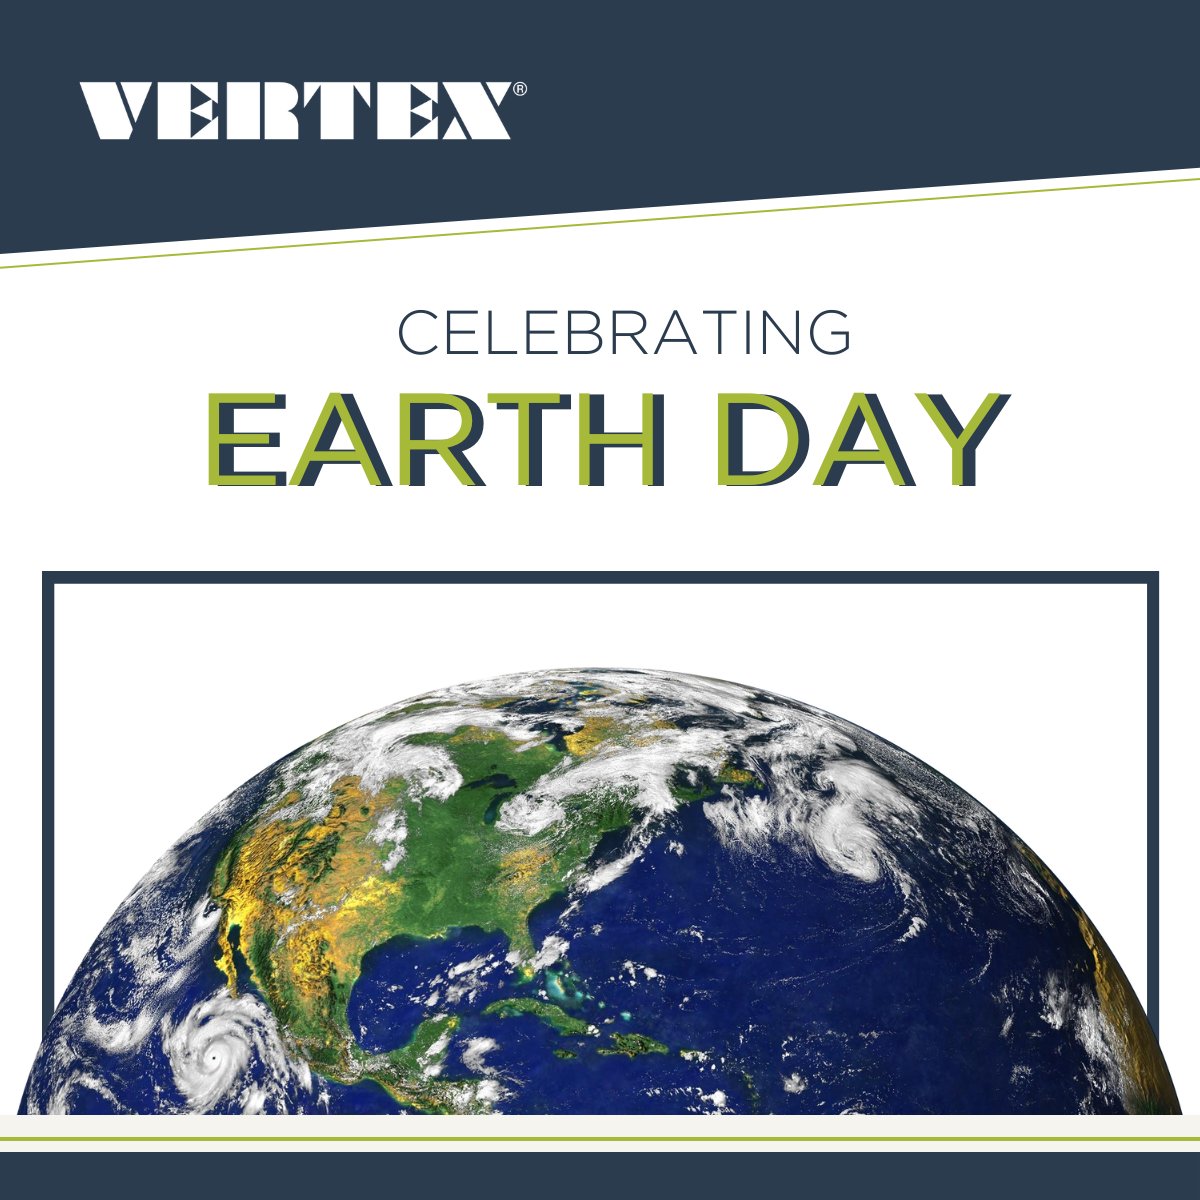 Celebrate #EarthDay with VERTEX! Our global work spans environmental, engineering, construction advisory, and forensics services. This year's theme: Plastics - risks & solutions. VERTEX is committed to sustainable outcomes. Learn more at hubs.la/Q02tCkff0. #VertexEng